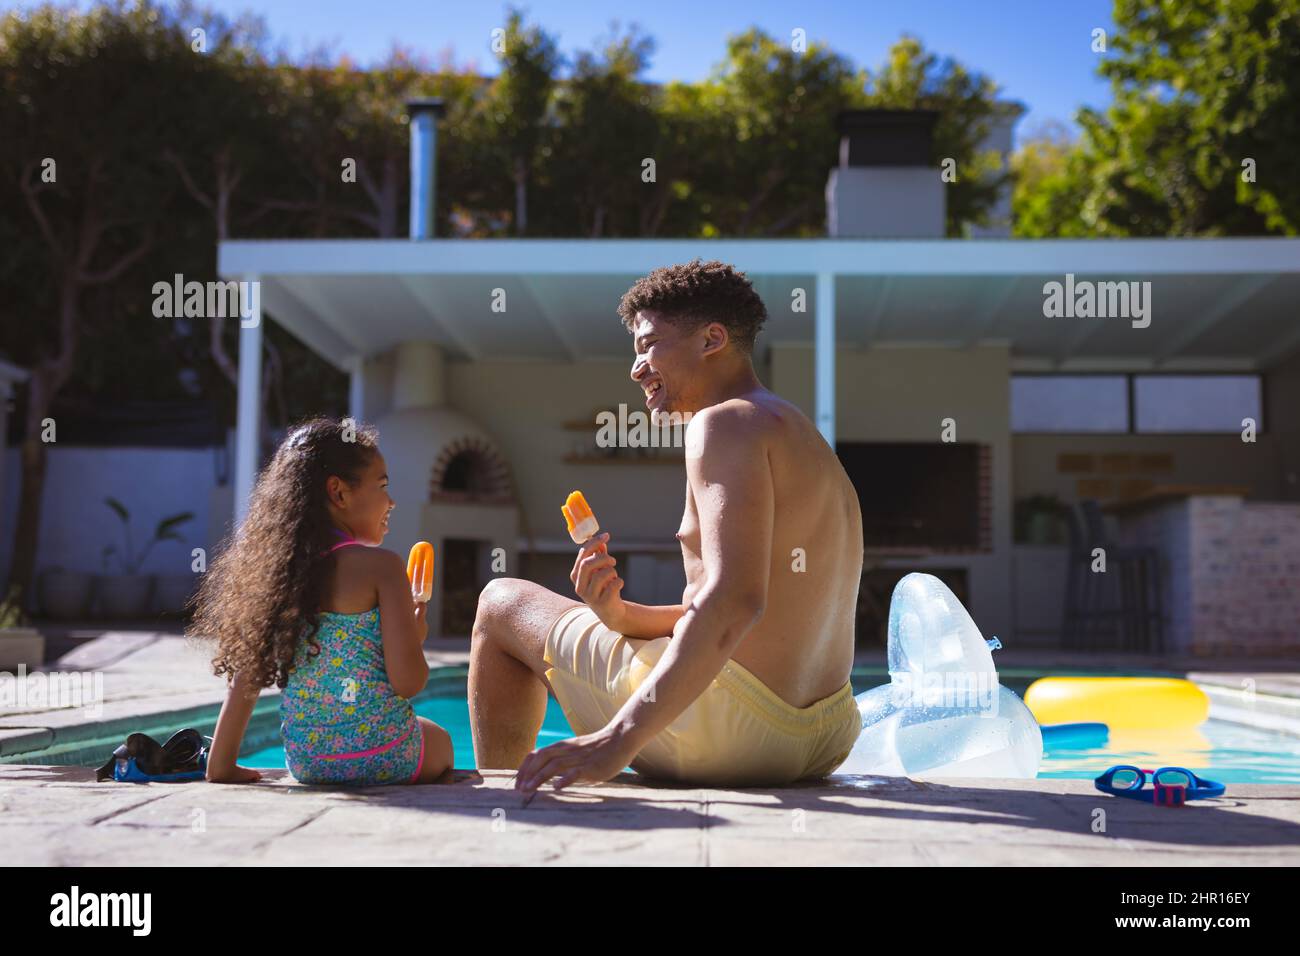 Multiracial father and daughter eating flavored ice pops while sitting together at poolside Stock Photo